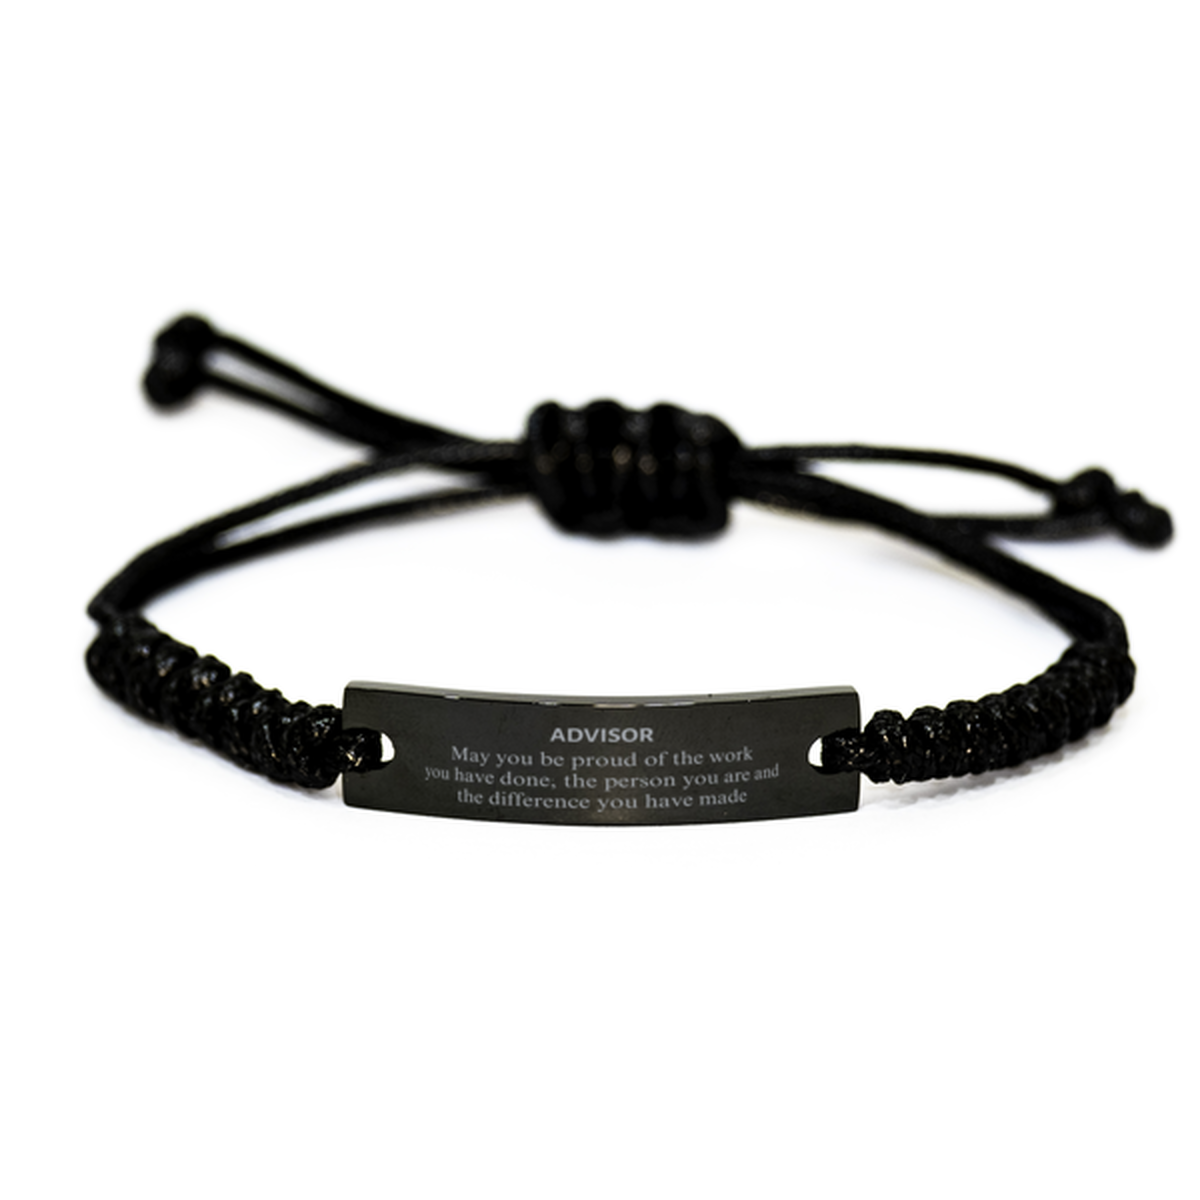 Advisor May you be proud of the work you have done, Retirement Advisor Black Rope Bracelet for Colleague Appreciation Gifts Amazing for Advisor